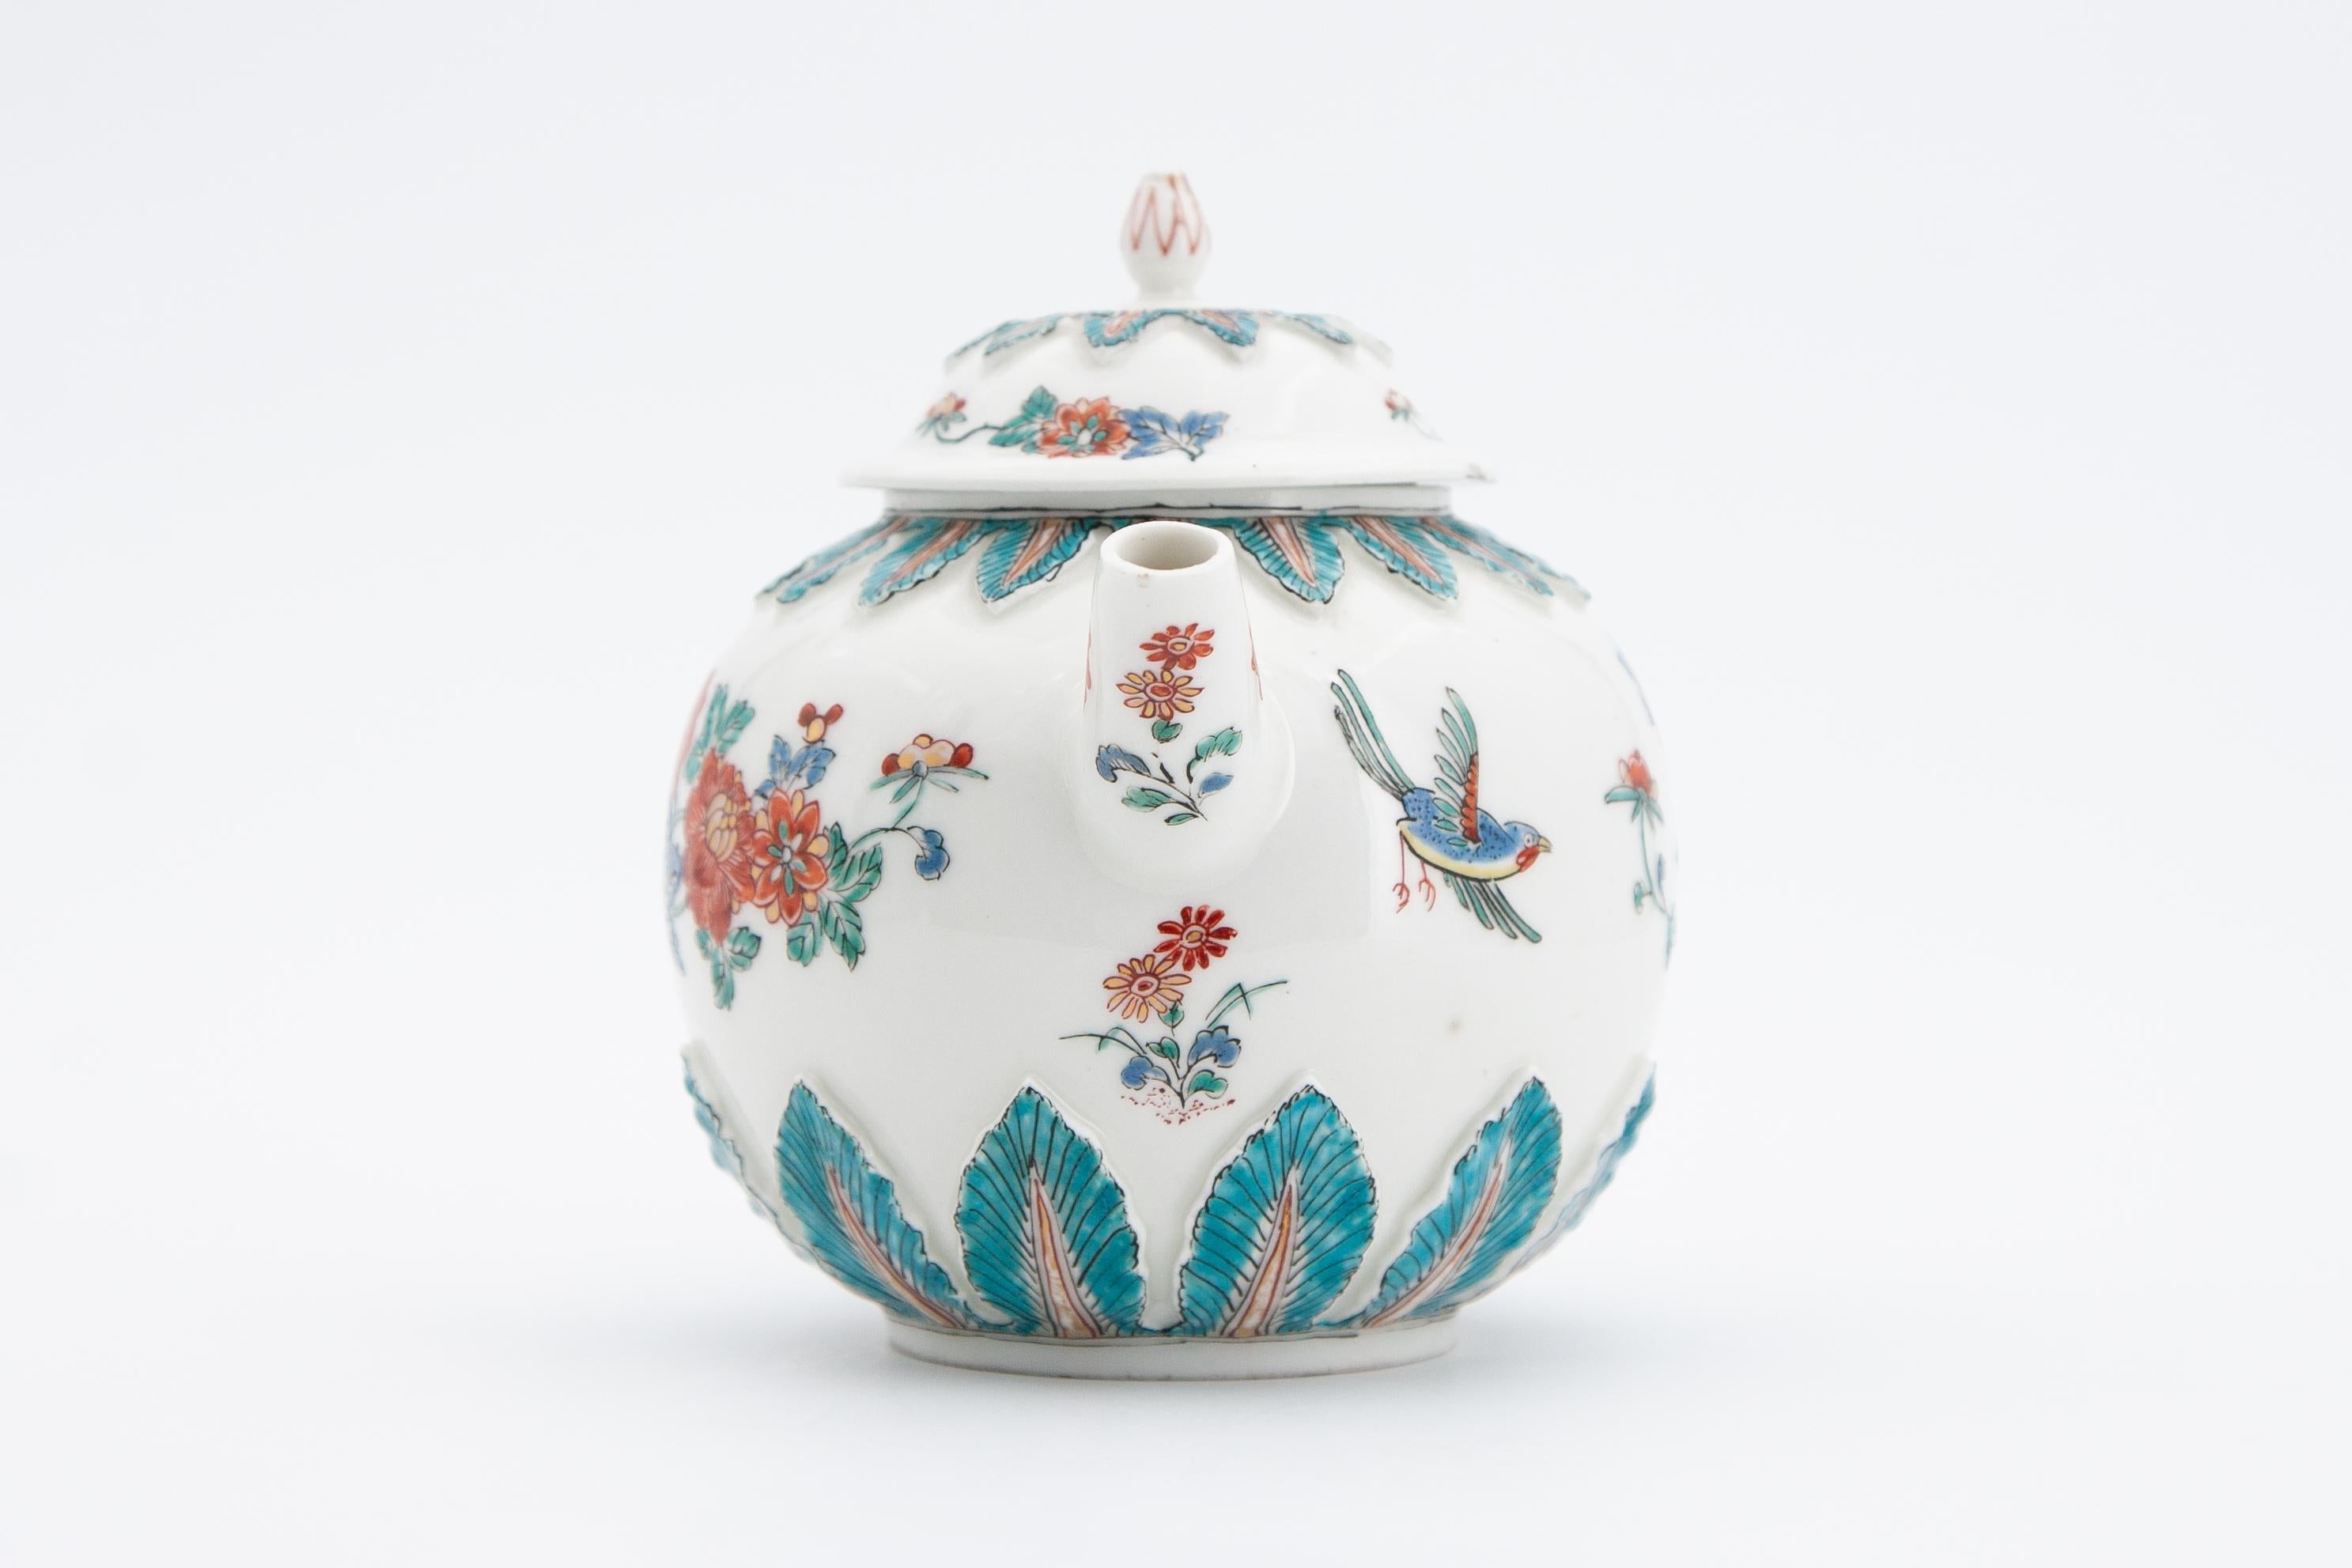 Early Meissen Porcelain Teapot circa 1715 from the Arnhold Collection In Excellent Condition For Sale In Fort Lauderdale, FL